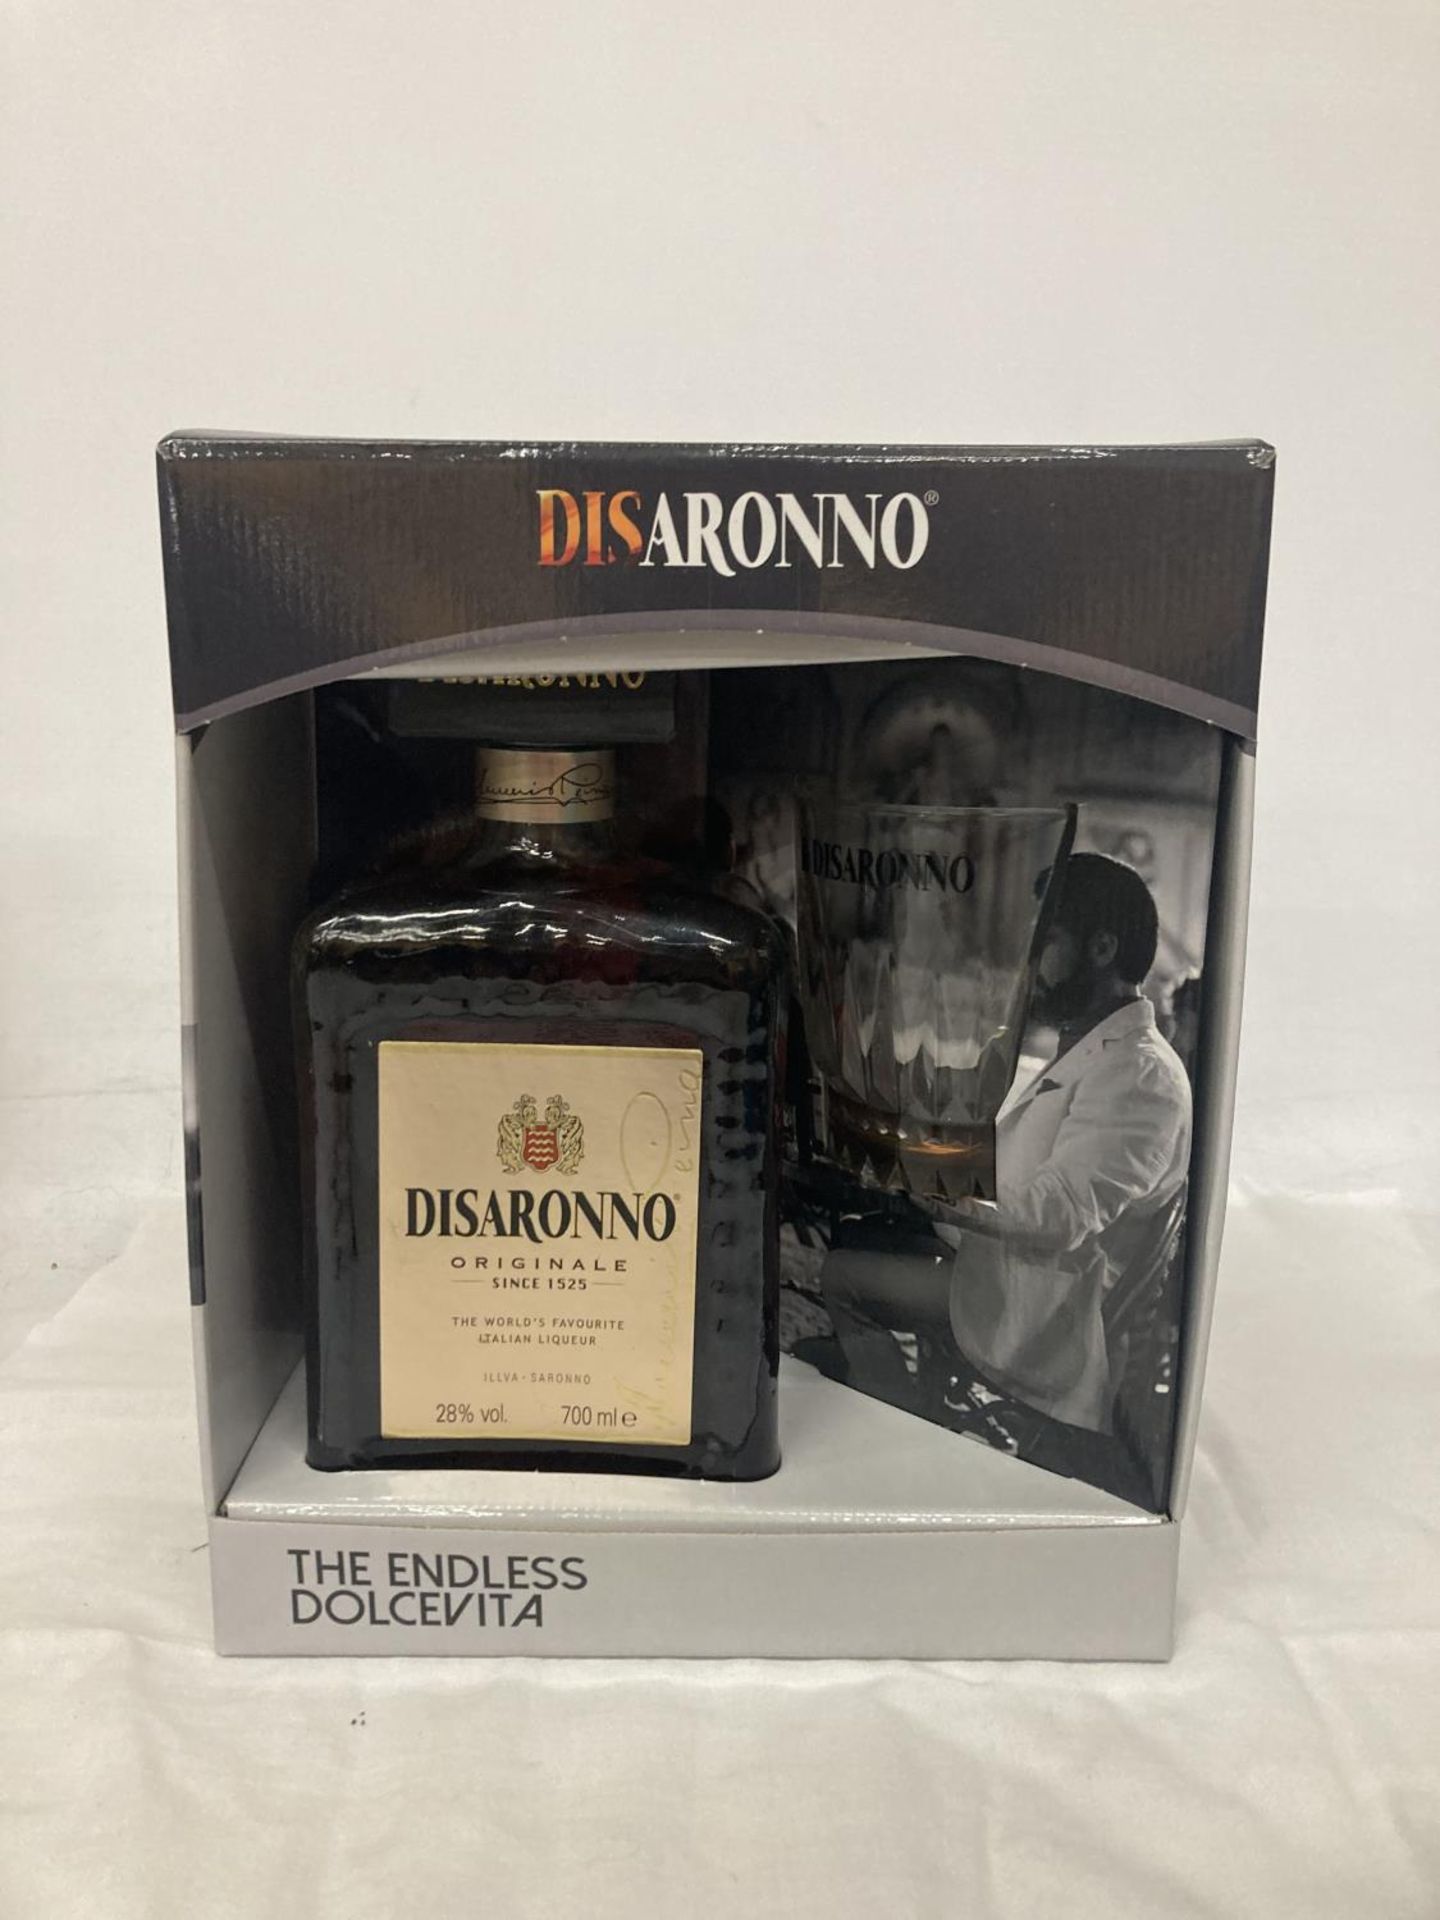 A BOXED DISARONNO GIFT SET WITH 700ML BOTTLE OF DISARONNO AND A BRANDED GLASS